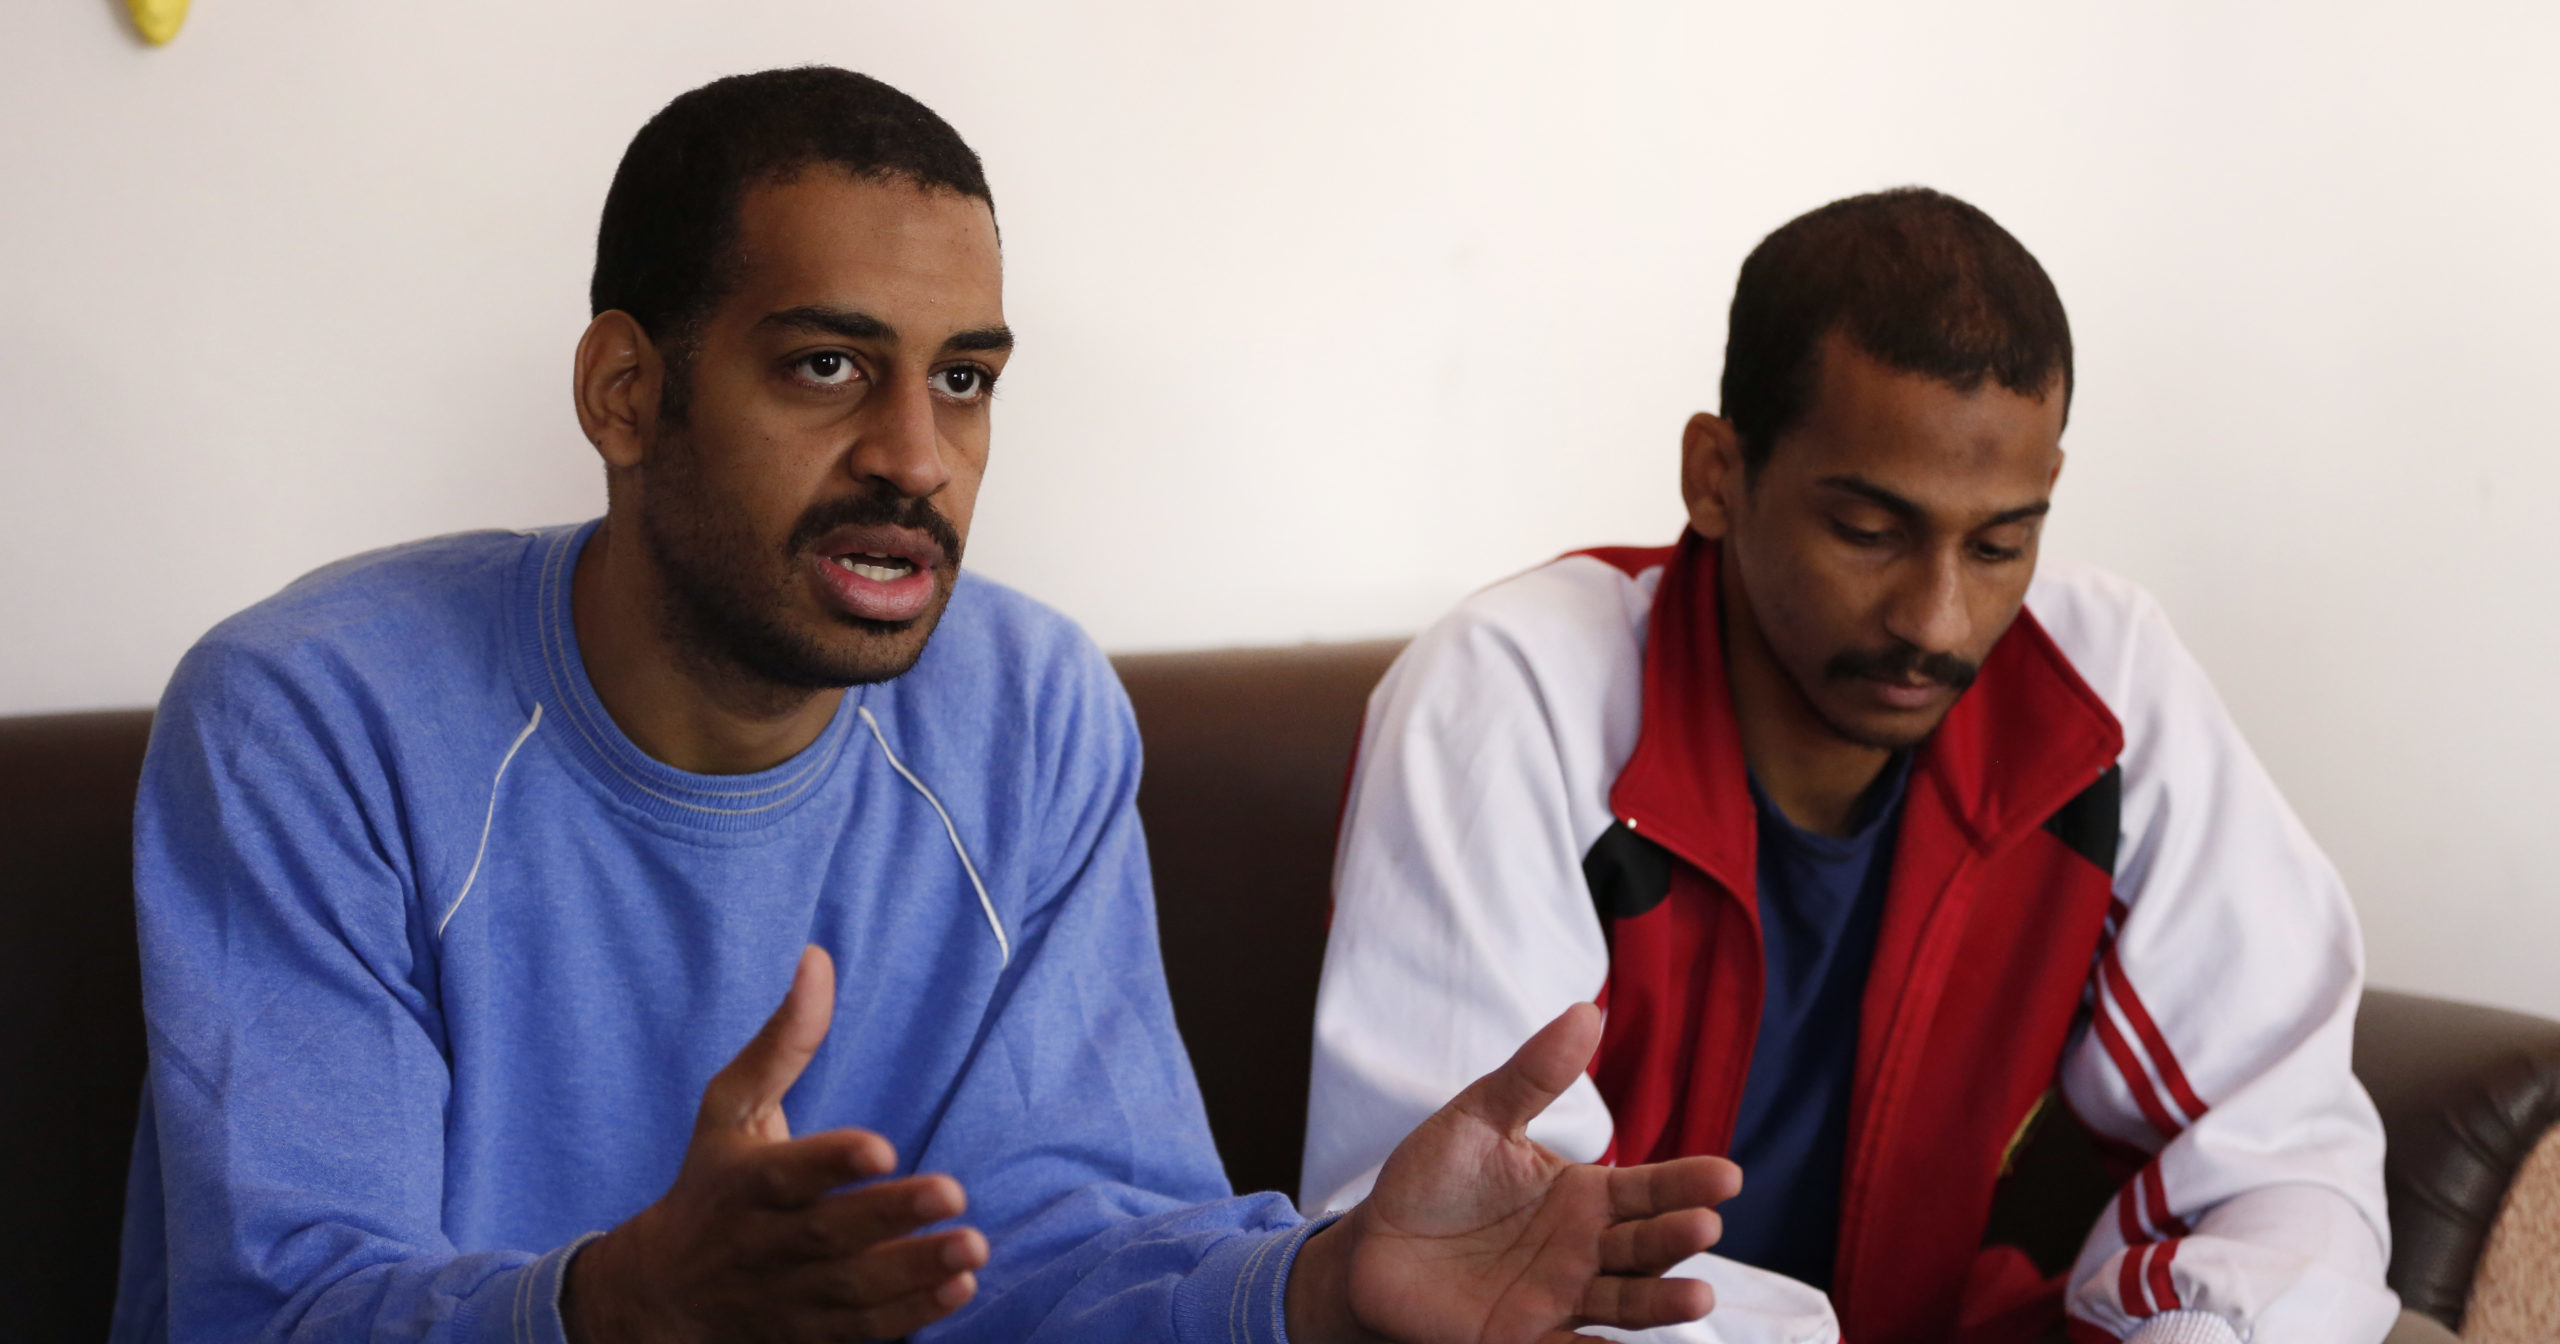 In this March 30, 2019, file photo, Alexanda Amon Kotey, left, and El Shafee Elsheikh speak during an interview with The Associated Press at a security center in Kobani, Syria.